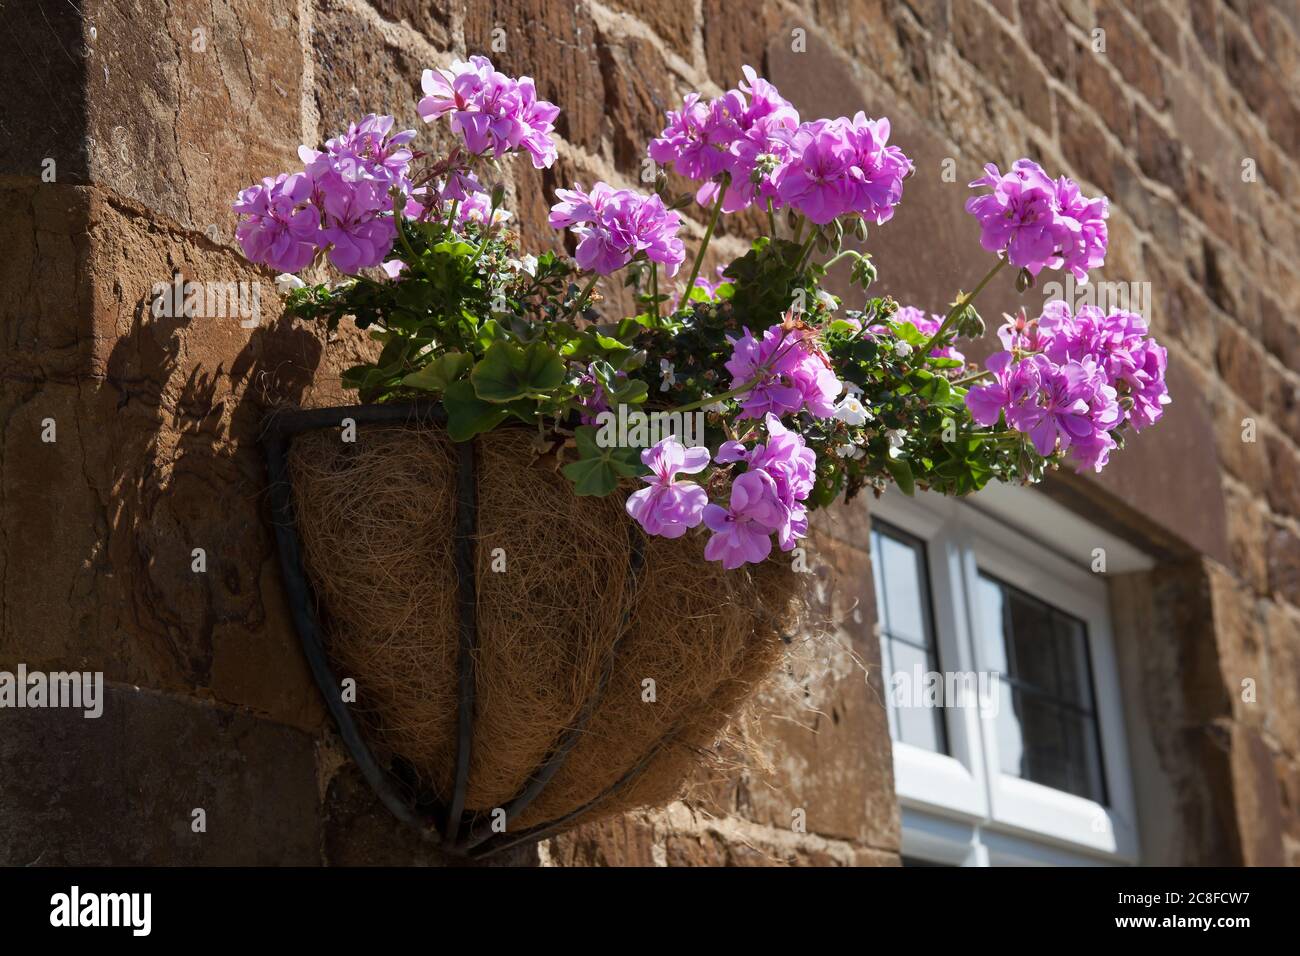 Pink Ivy Geranium plants in a hanging basket in the UK Stock Photo